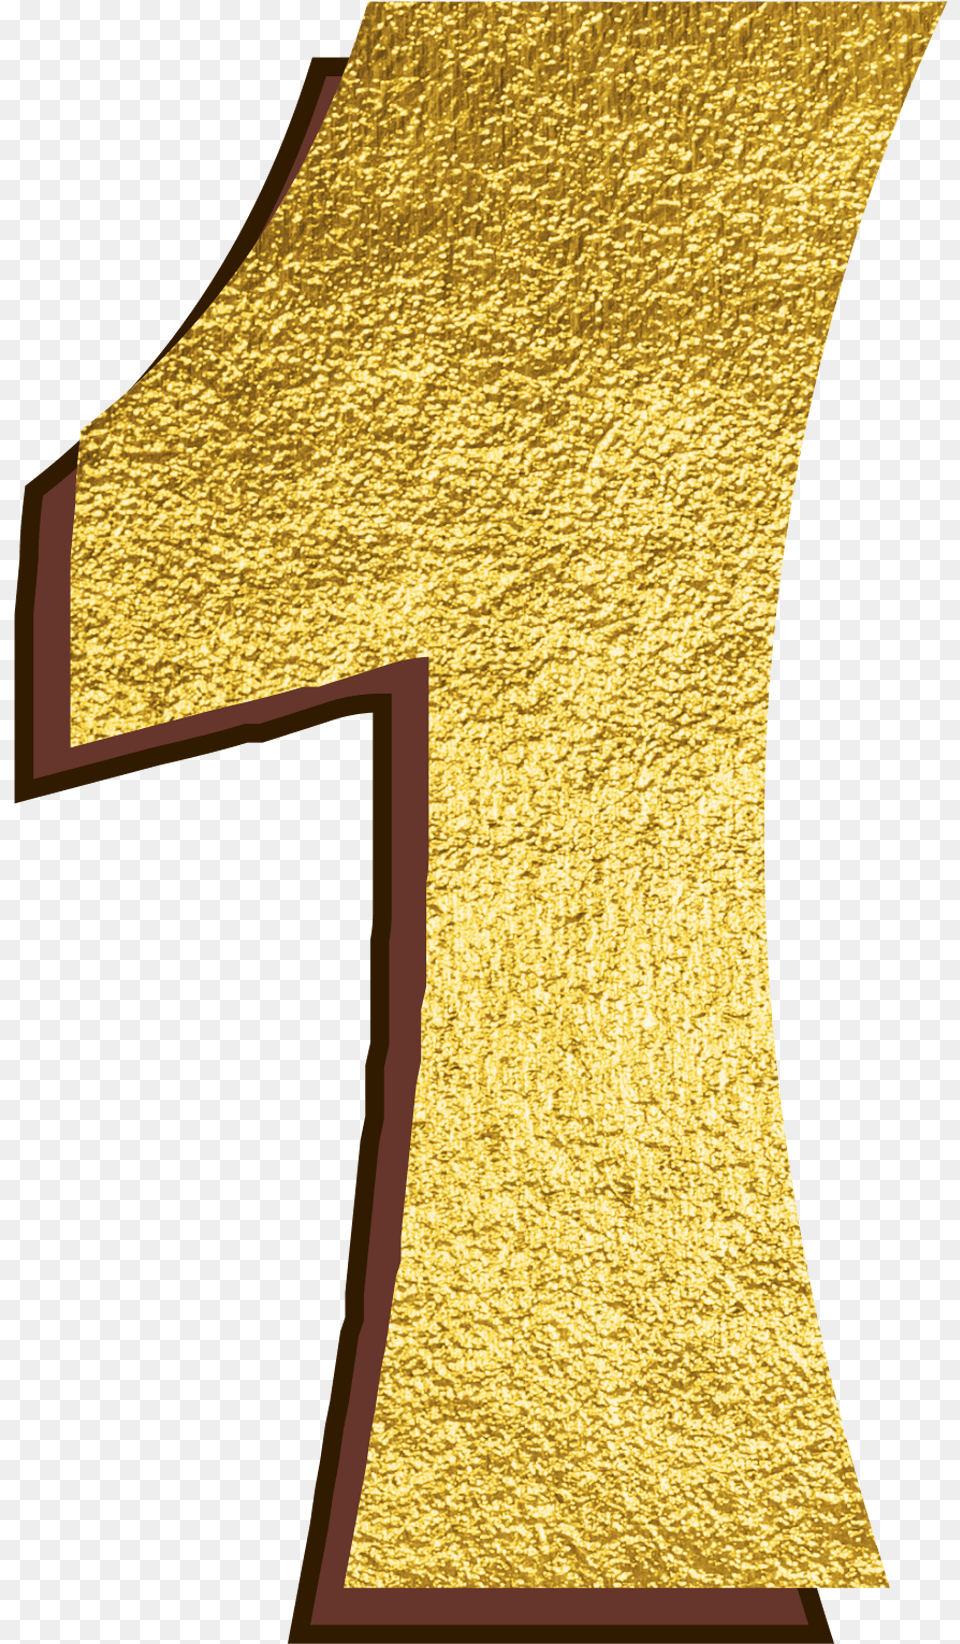 Plug The Golden Ticket Usb Drive Into Your Computer Wood, Cross, Gold, Symbol, Text Free Transparent Png